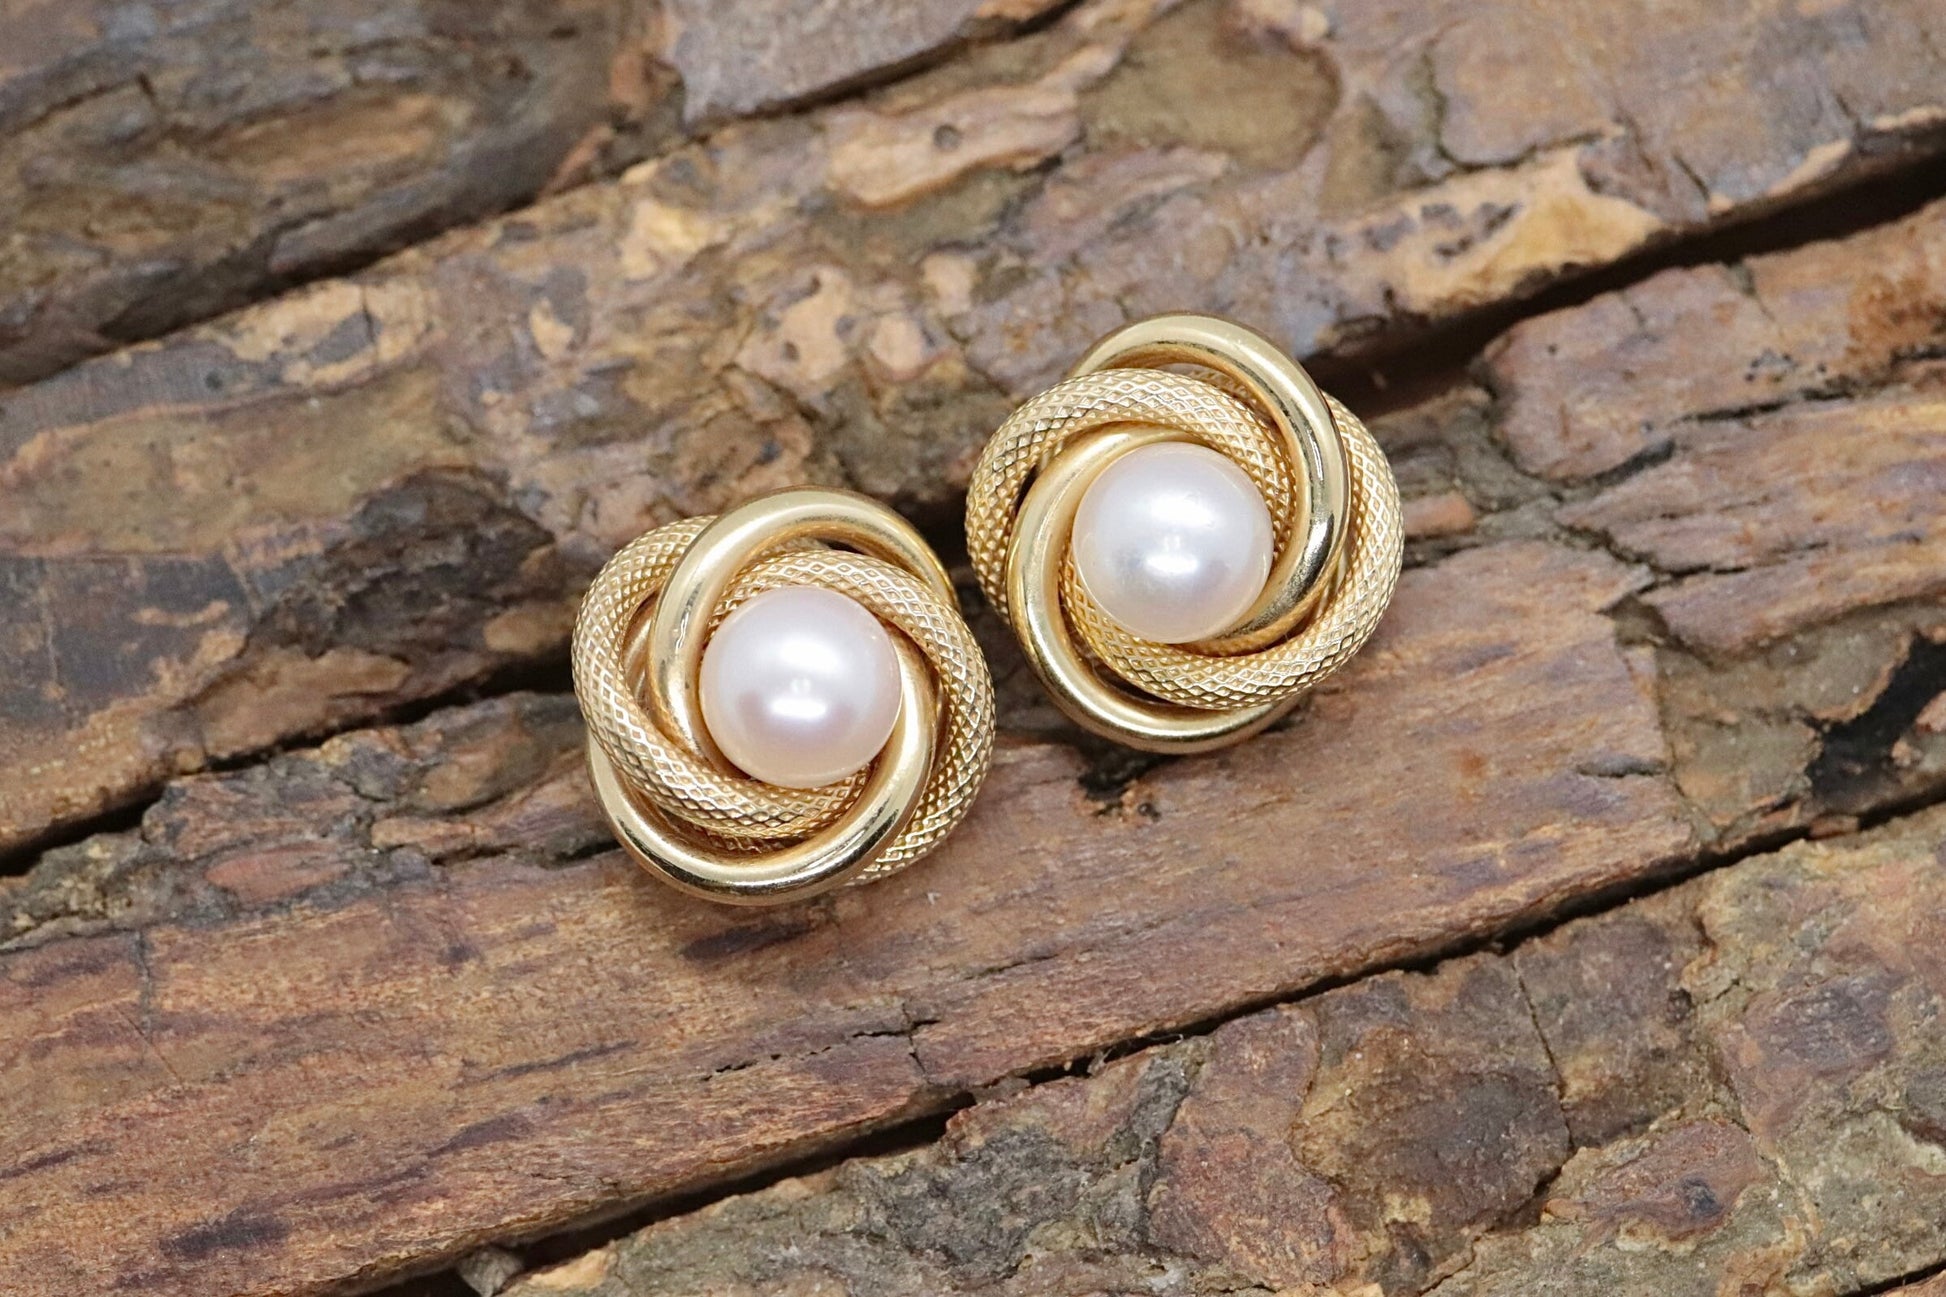 14k  Pearl Stud earrings with Rope coils. st(212/75)